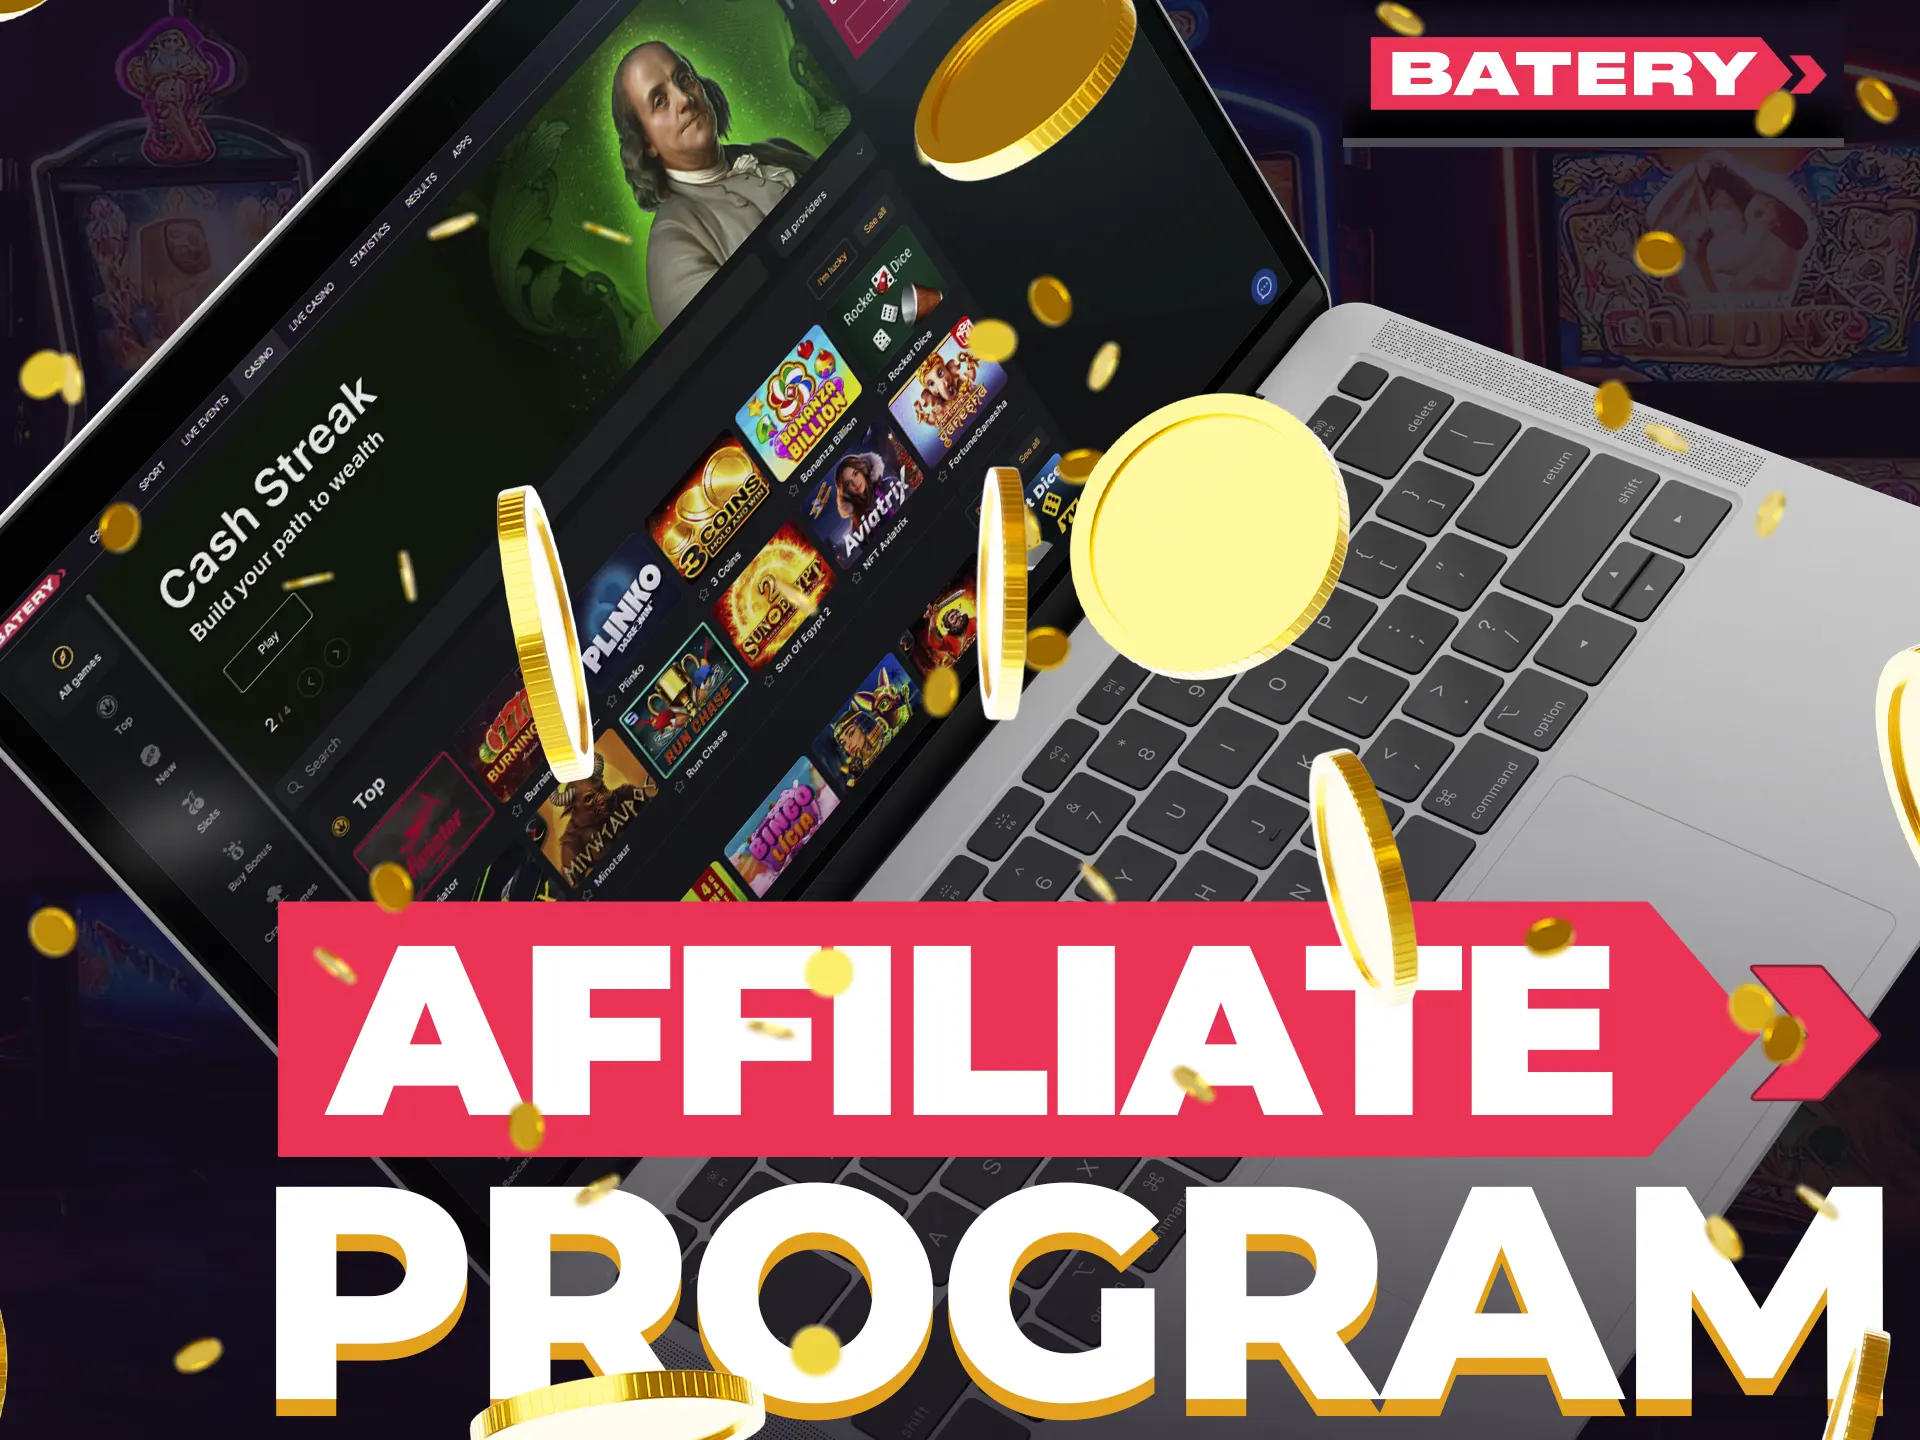 Batery's affiliate program offers CPA, RevShare, and Hybrid models and 30-40% commissions for partners.